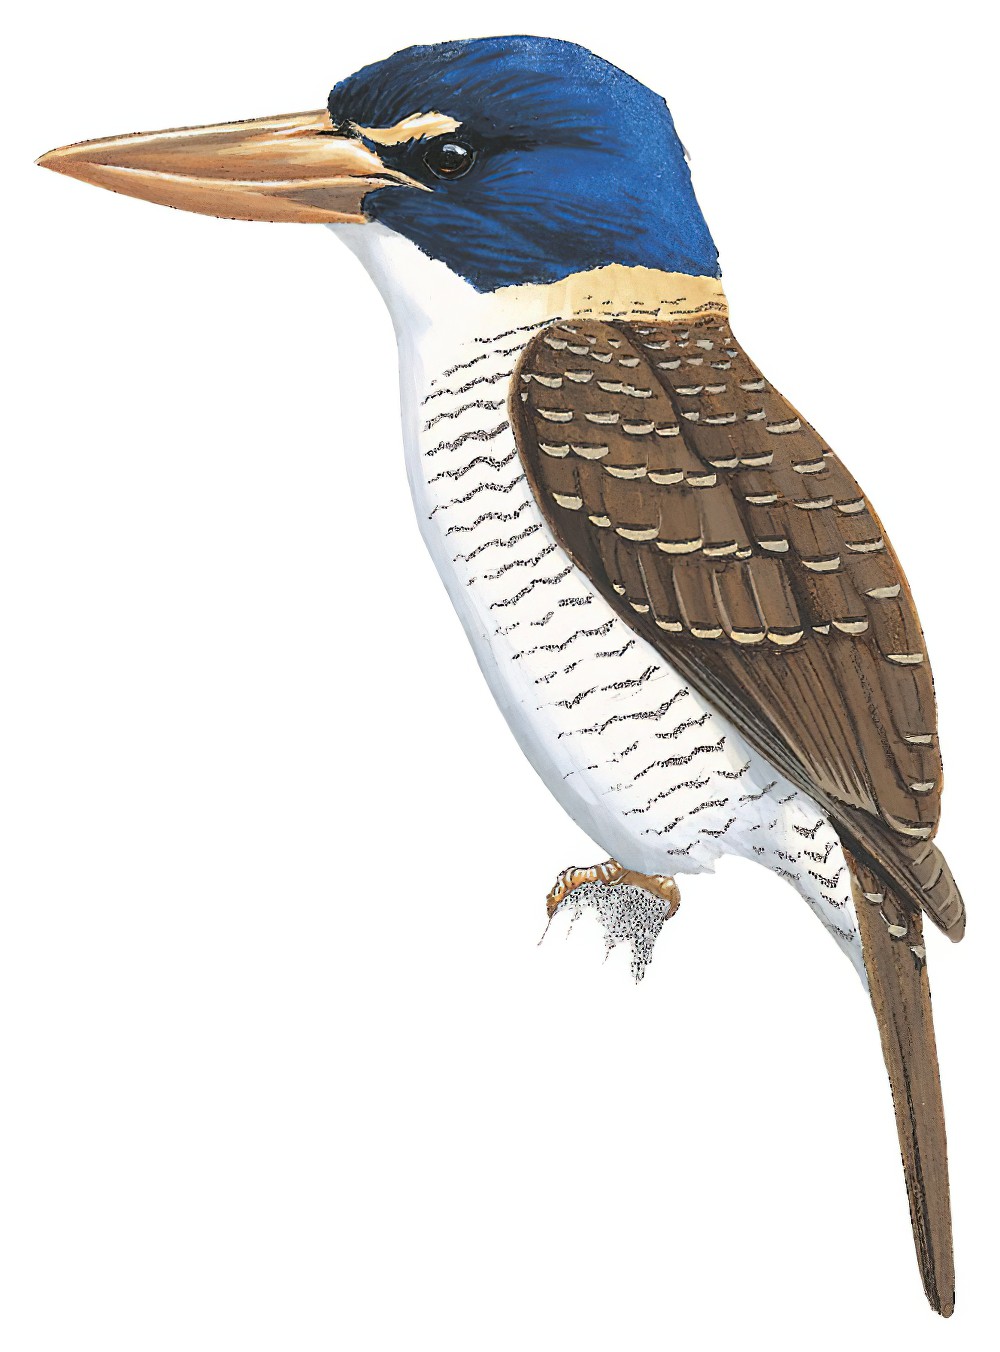 Scaly-breasted Kingfisher / Actenoides princeps